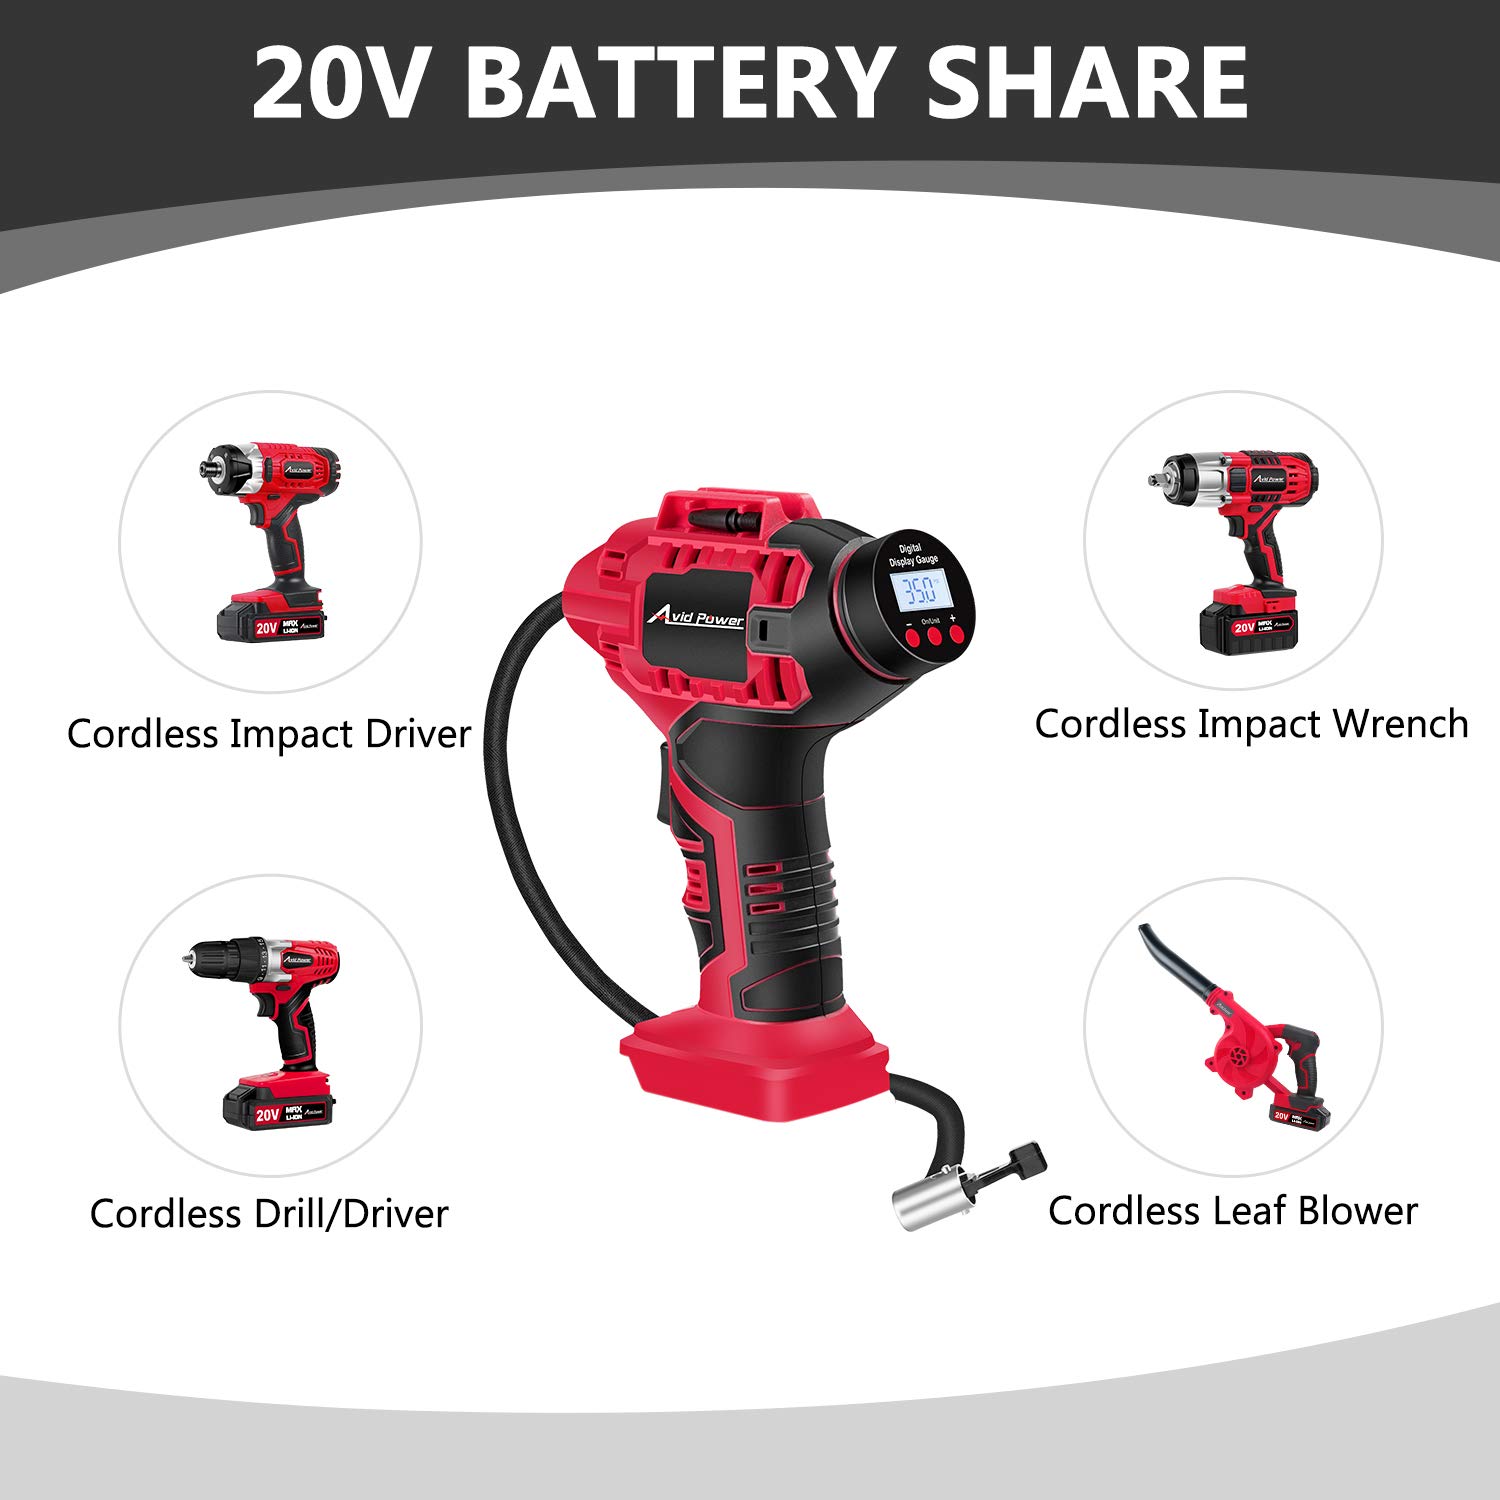 AVID POWER 20V Cordless Drill Set Bundle with Cordless Tire Inflator Air Compressor